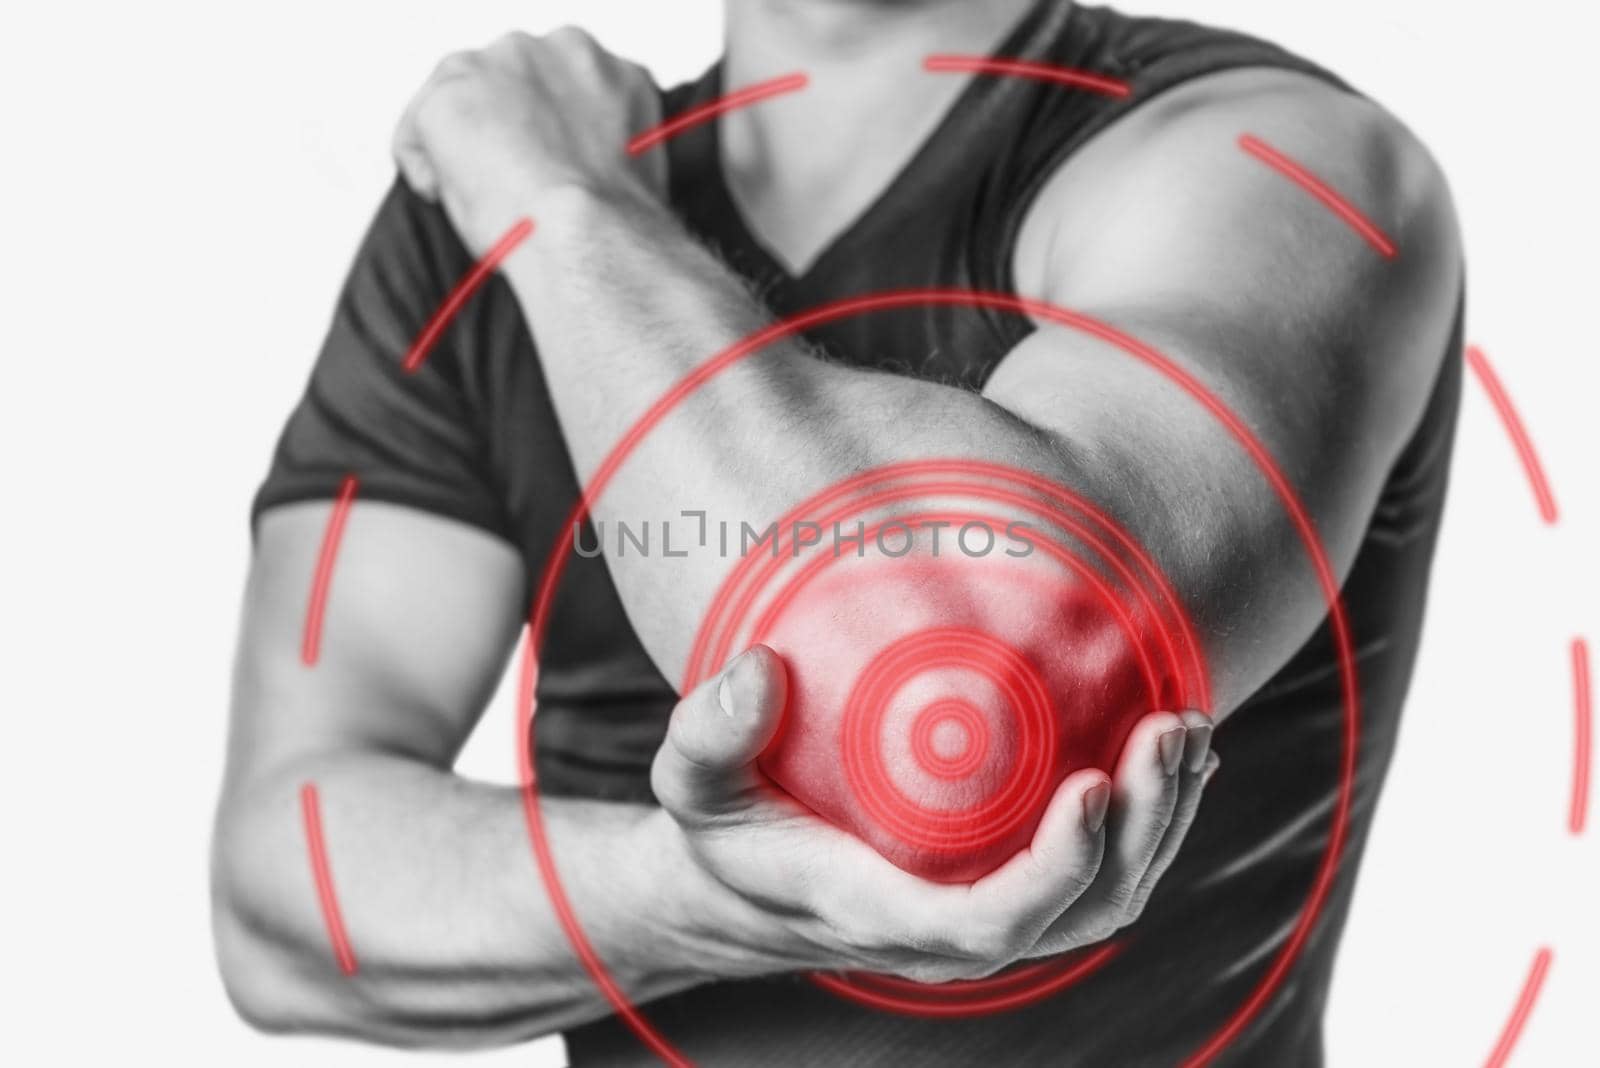 Acute pain in a male elbow. Man holding his elbow. Monochrome image, isolated on a white background. Pain area of red color.